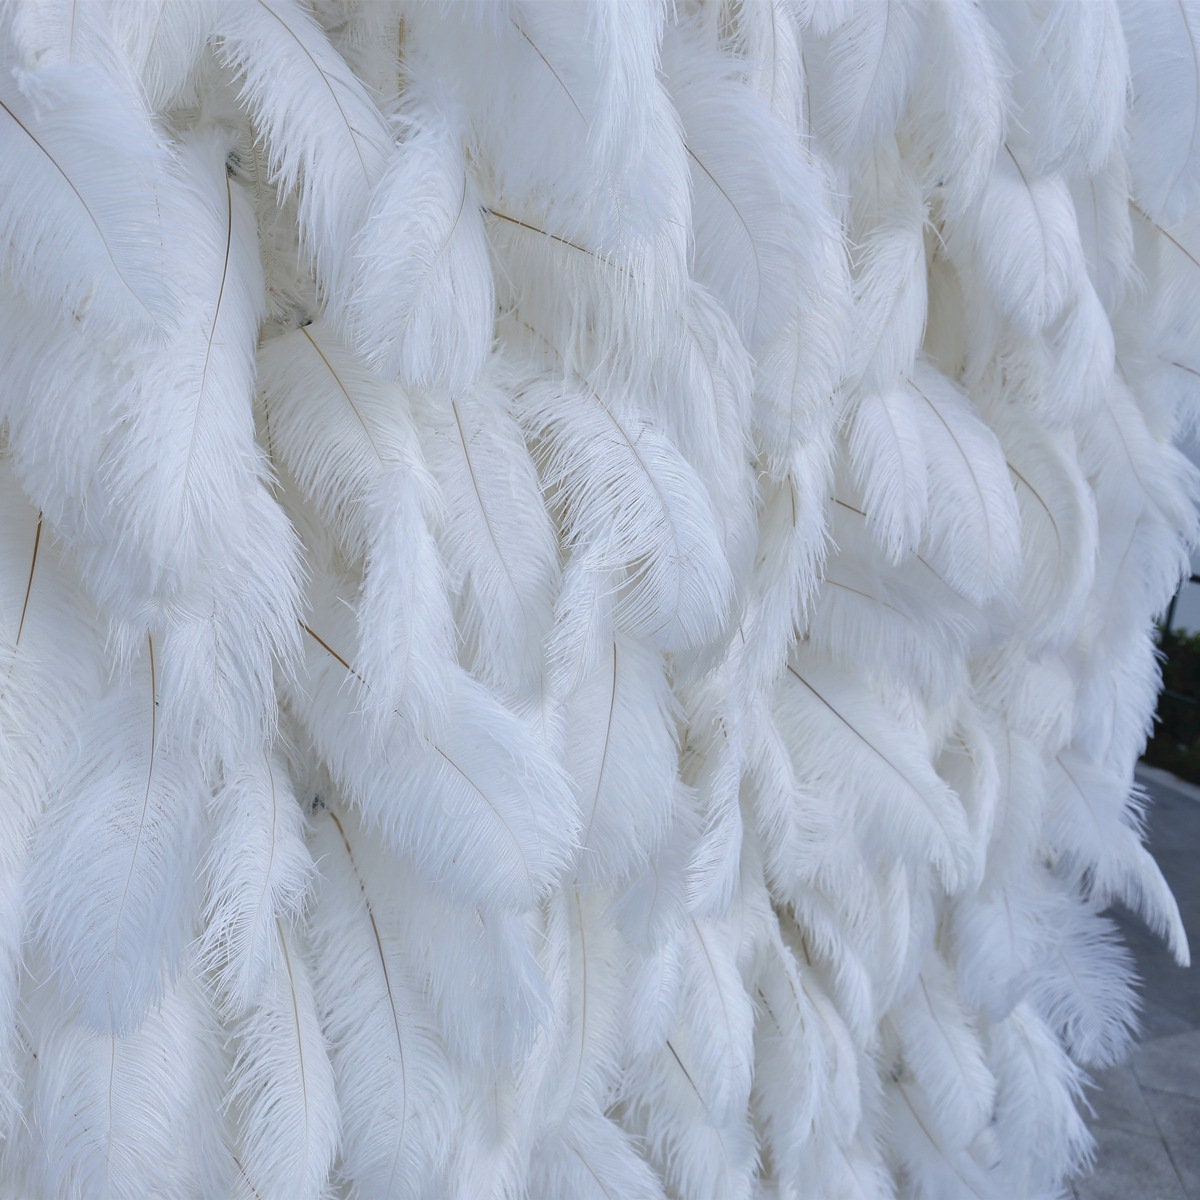 3D White Feather Wall  On Cloth Fabric Wedding Party Photo Backdrop Bridal Shower Special Event Top Quality Easy Quick Assemble